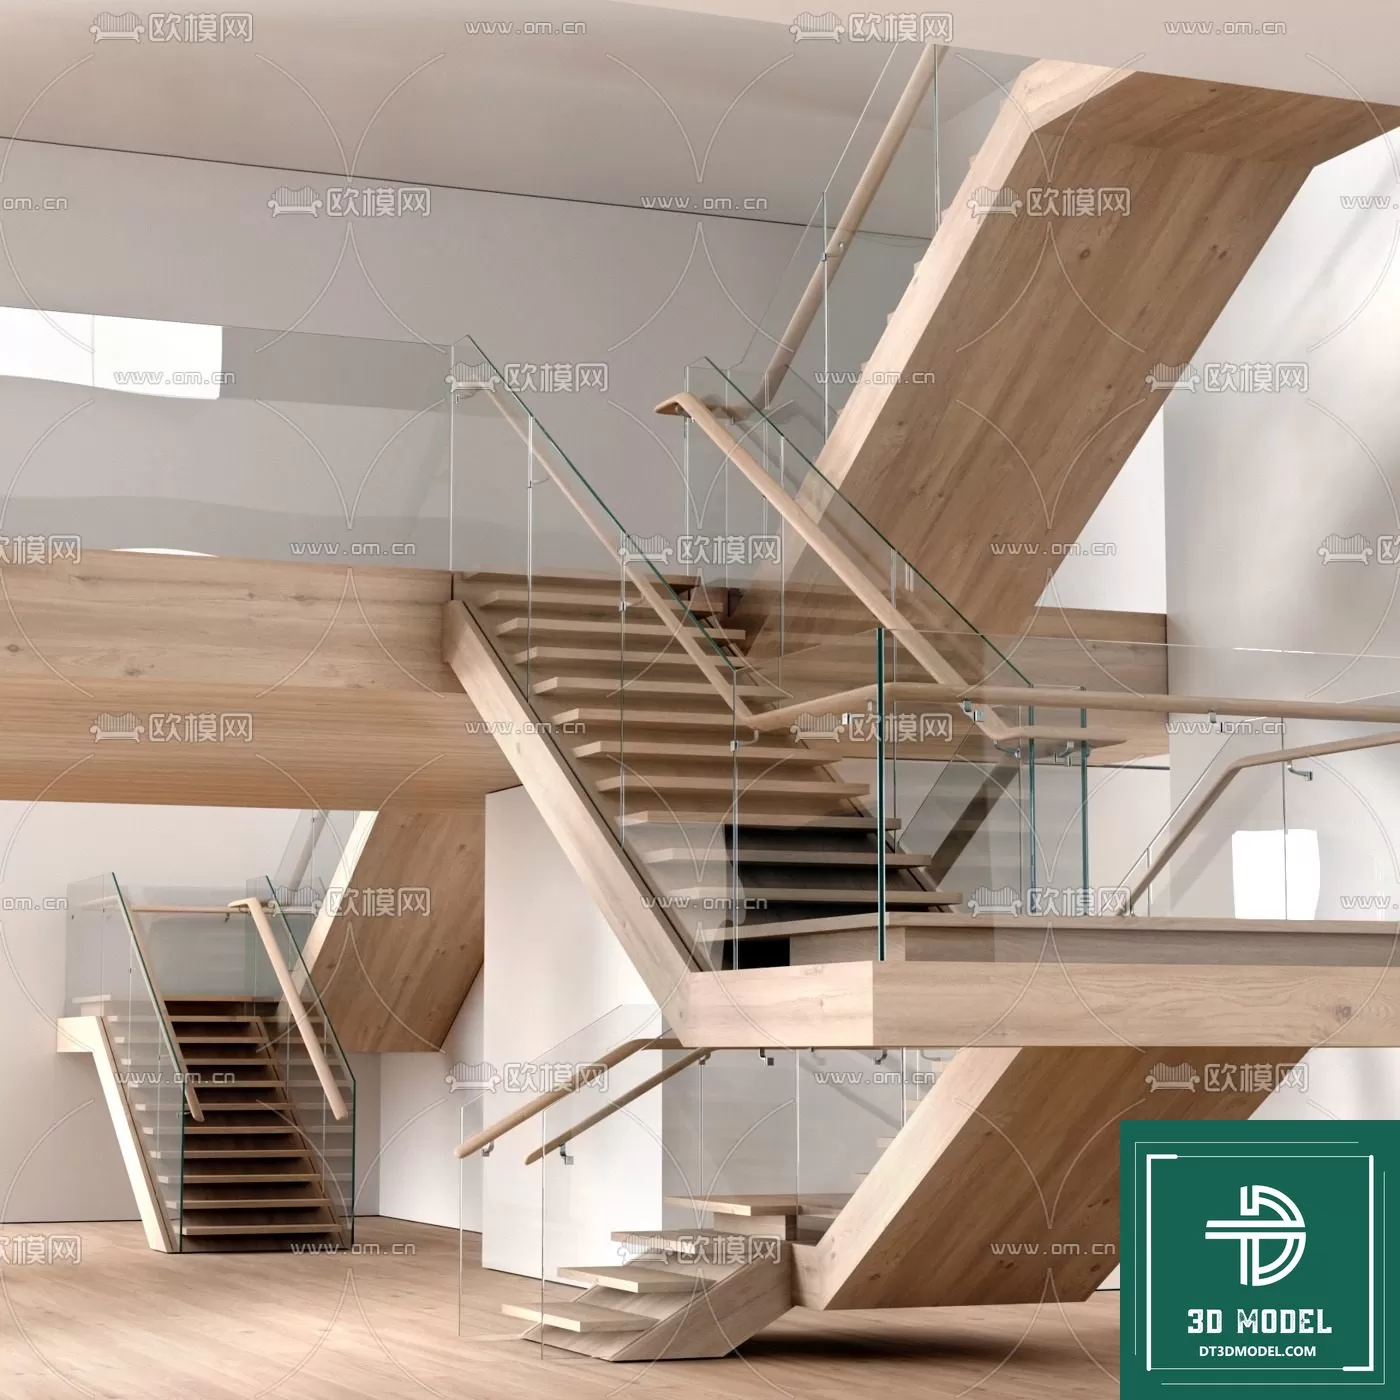 STAIR – 3DS MAX MODELS – 002 – PRO